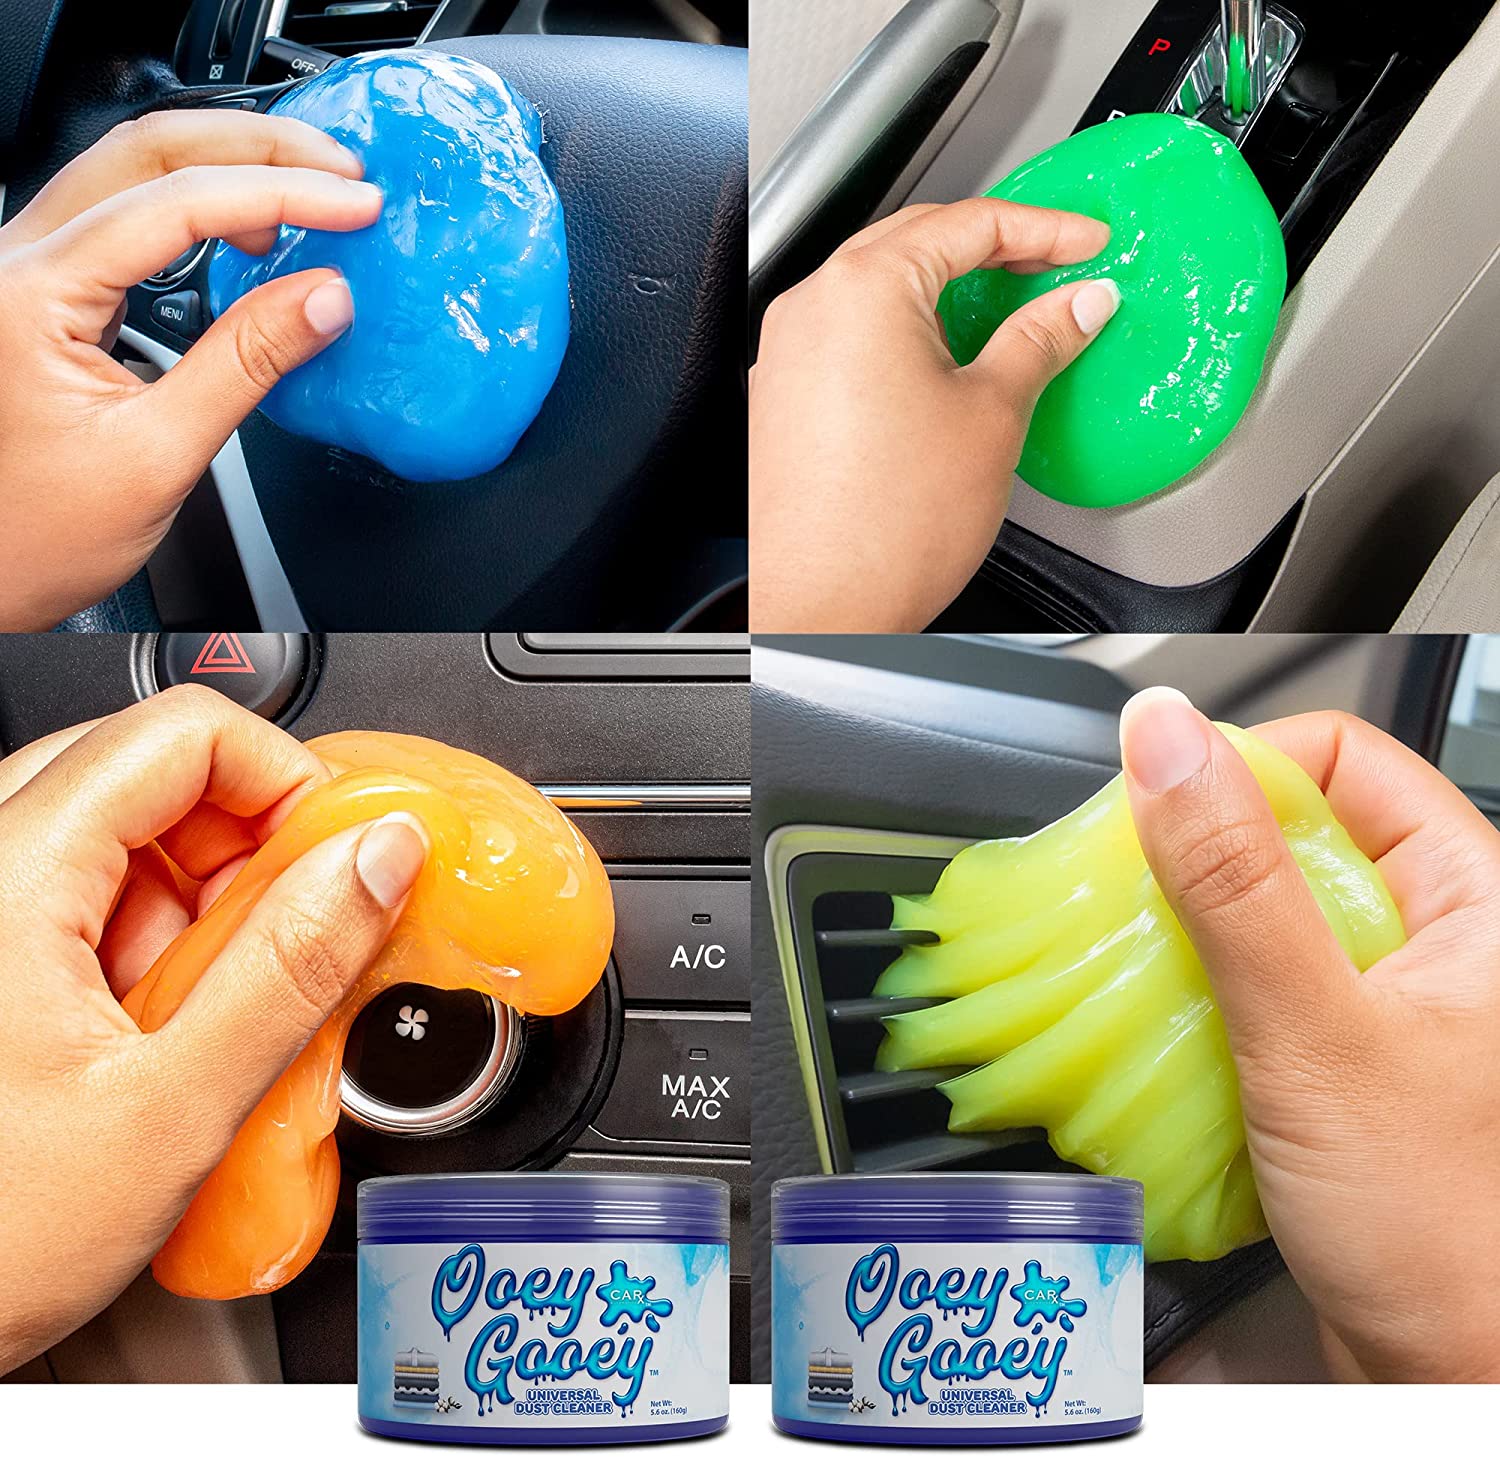 Ooey Gooey - Scented Car Cleaning Gel to Make Your Car Shine